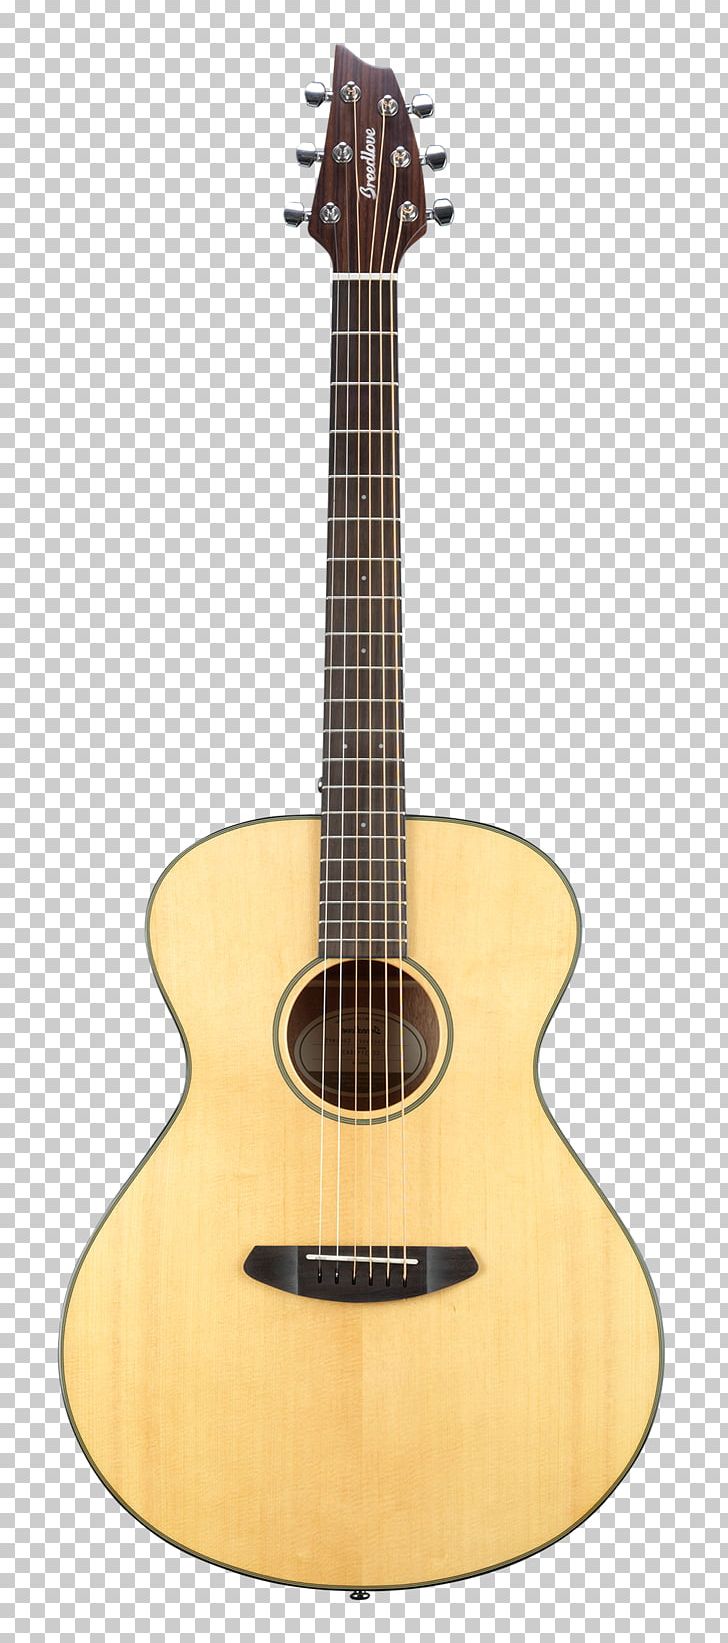 Steel-string Acoustic Guitar Twelve-string Guitar Acoustic-electric Guitar Dreadnought PNG, Clipart, Concert, Cuatro, Cutaway, Guitar Accessory, Musical Instruments Free PNG Download